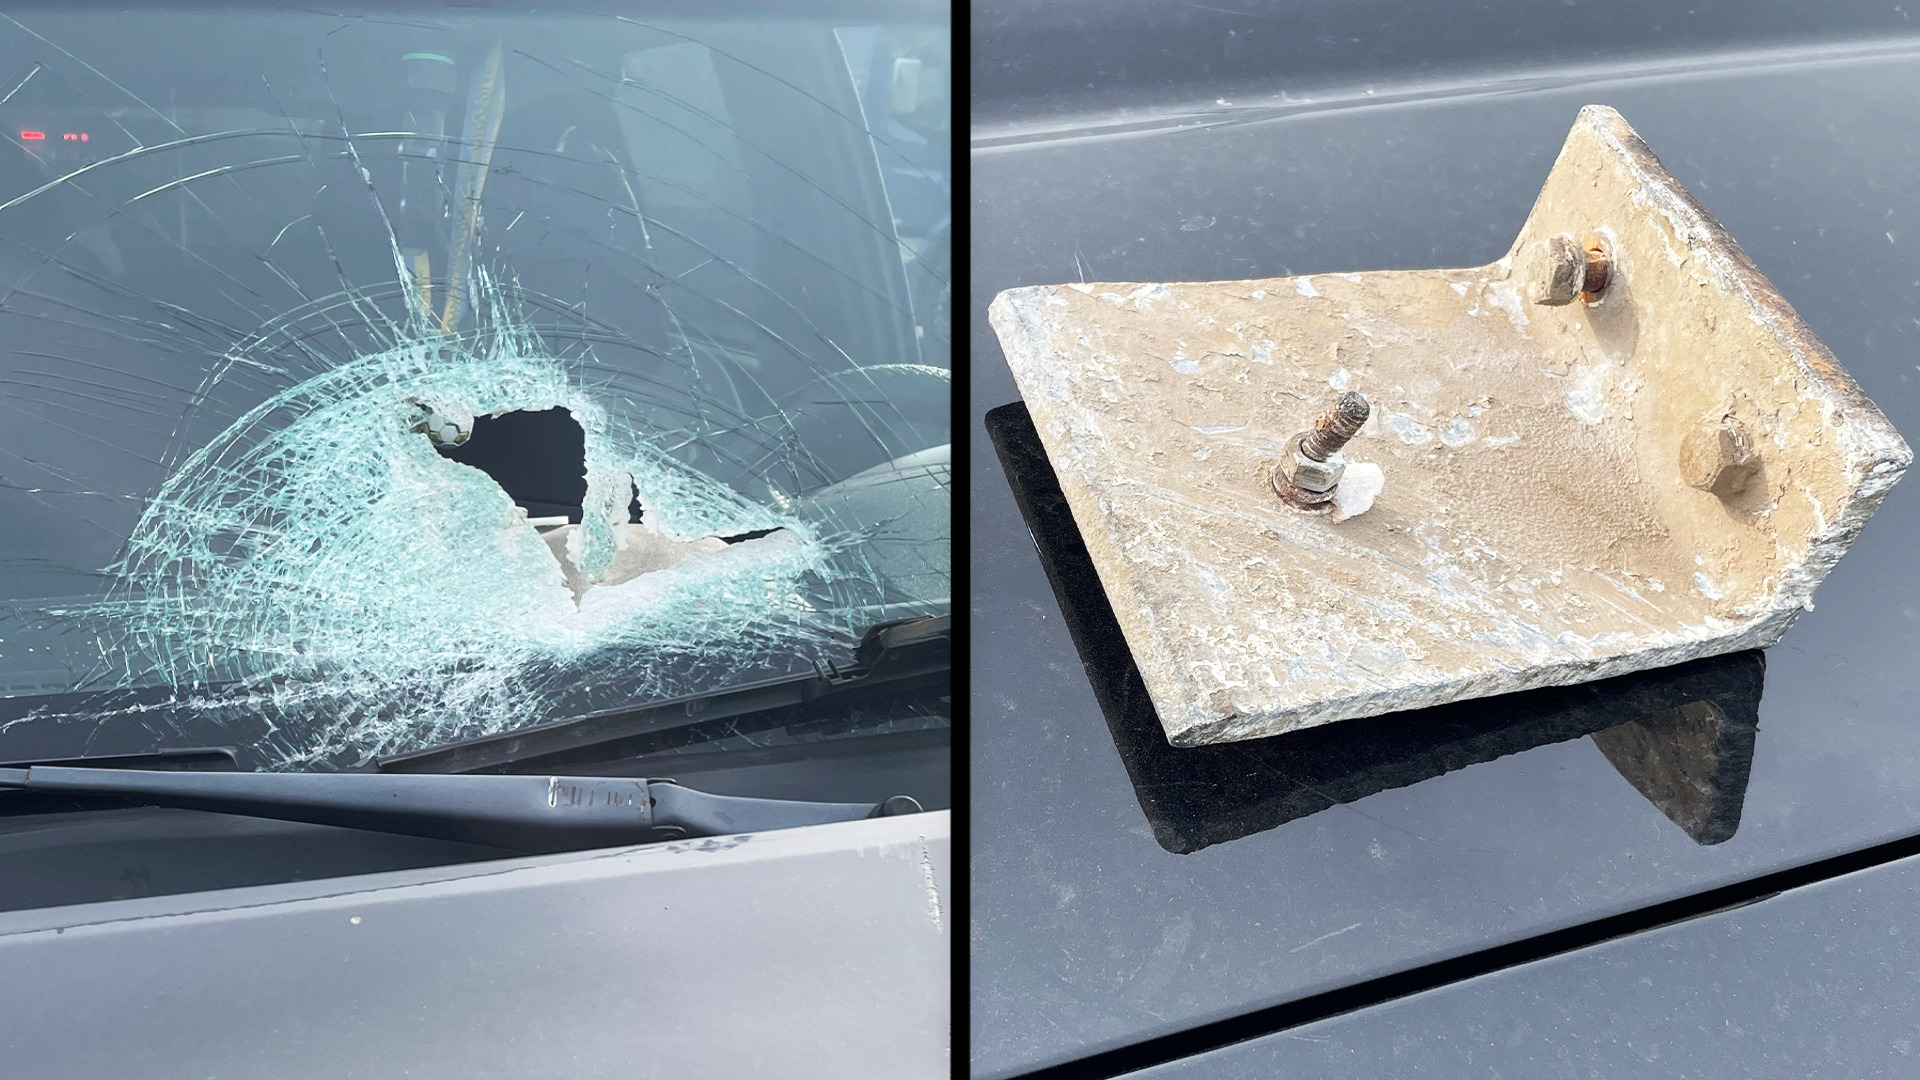 Driver and passenger narrowly escape serious injury after metal debris strikes windshield